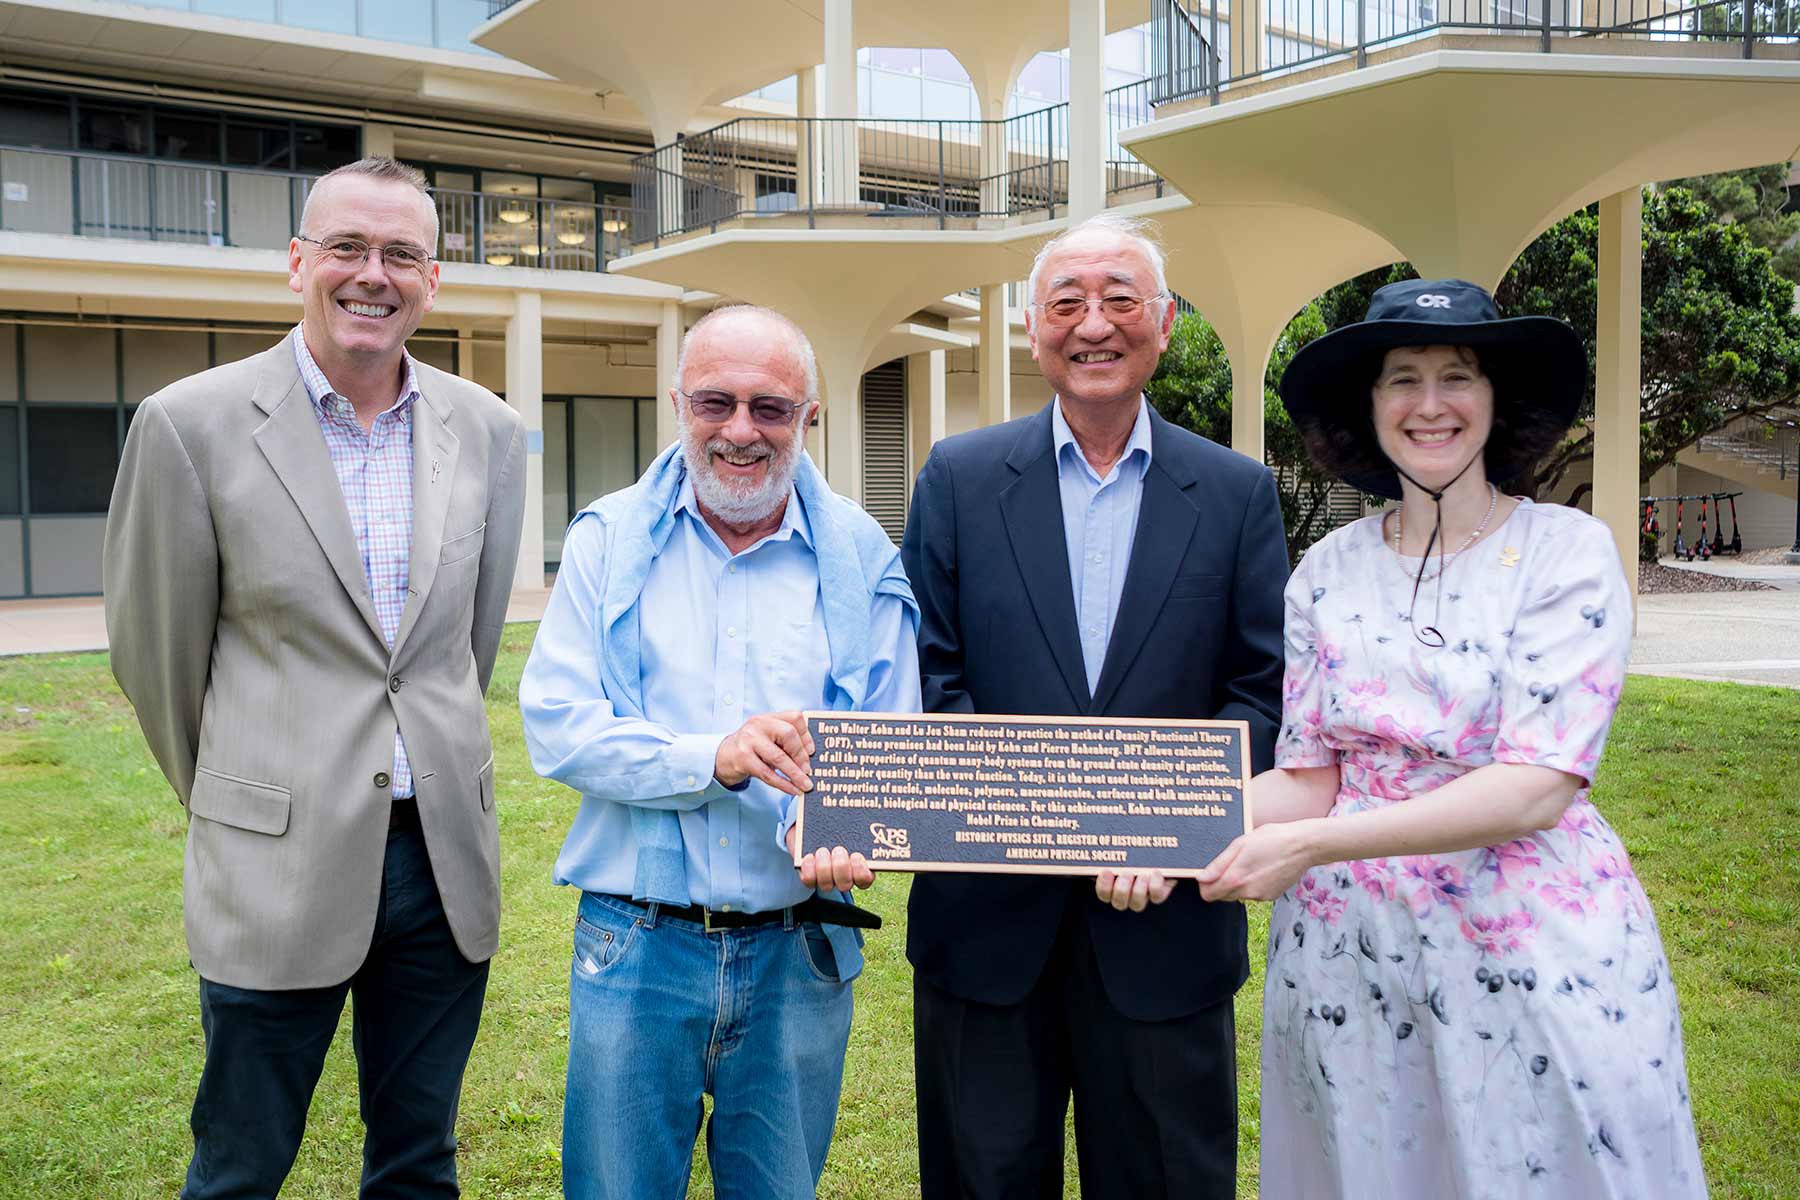 Dean Boggs, Professor Schuller, Professor Emeritus Sham and Executive Vice Chancellor Simmons hold the plaque commemorating Mayer Hall as a historic landmark.